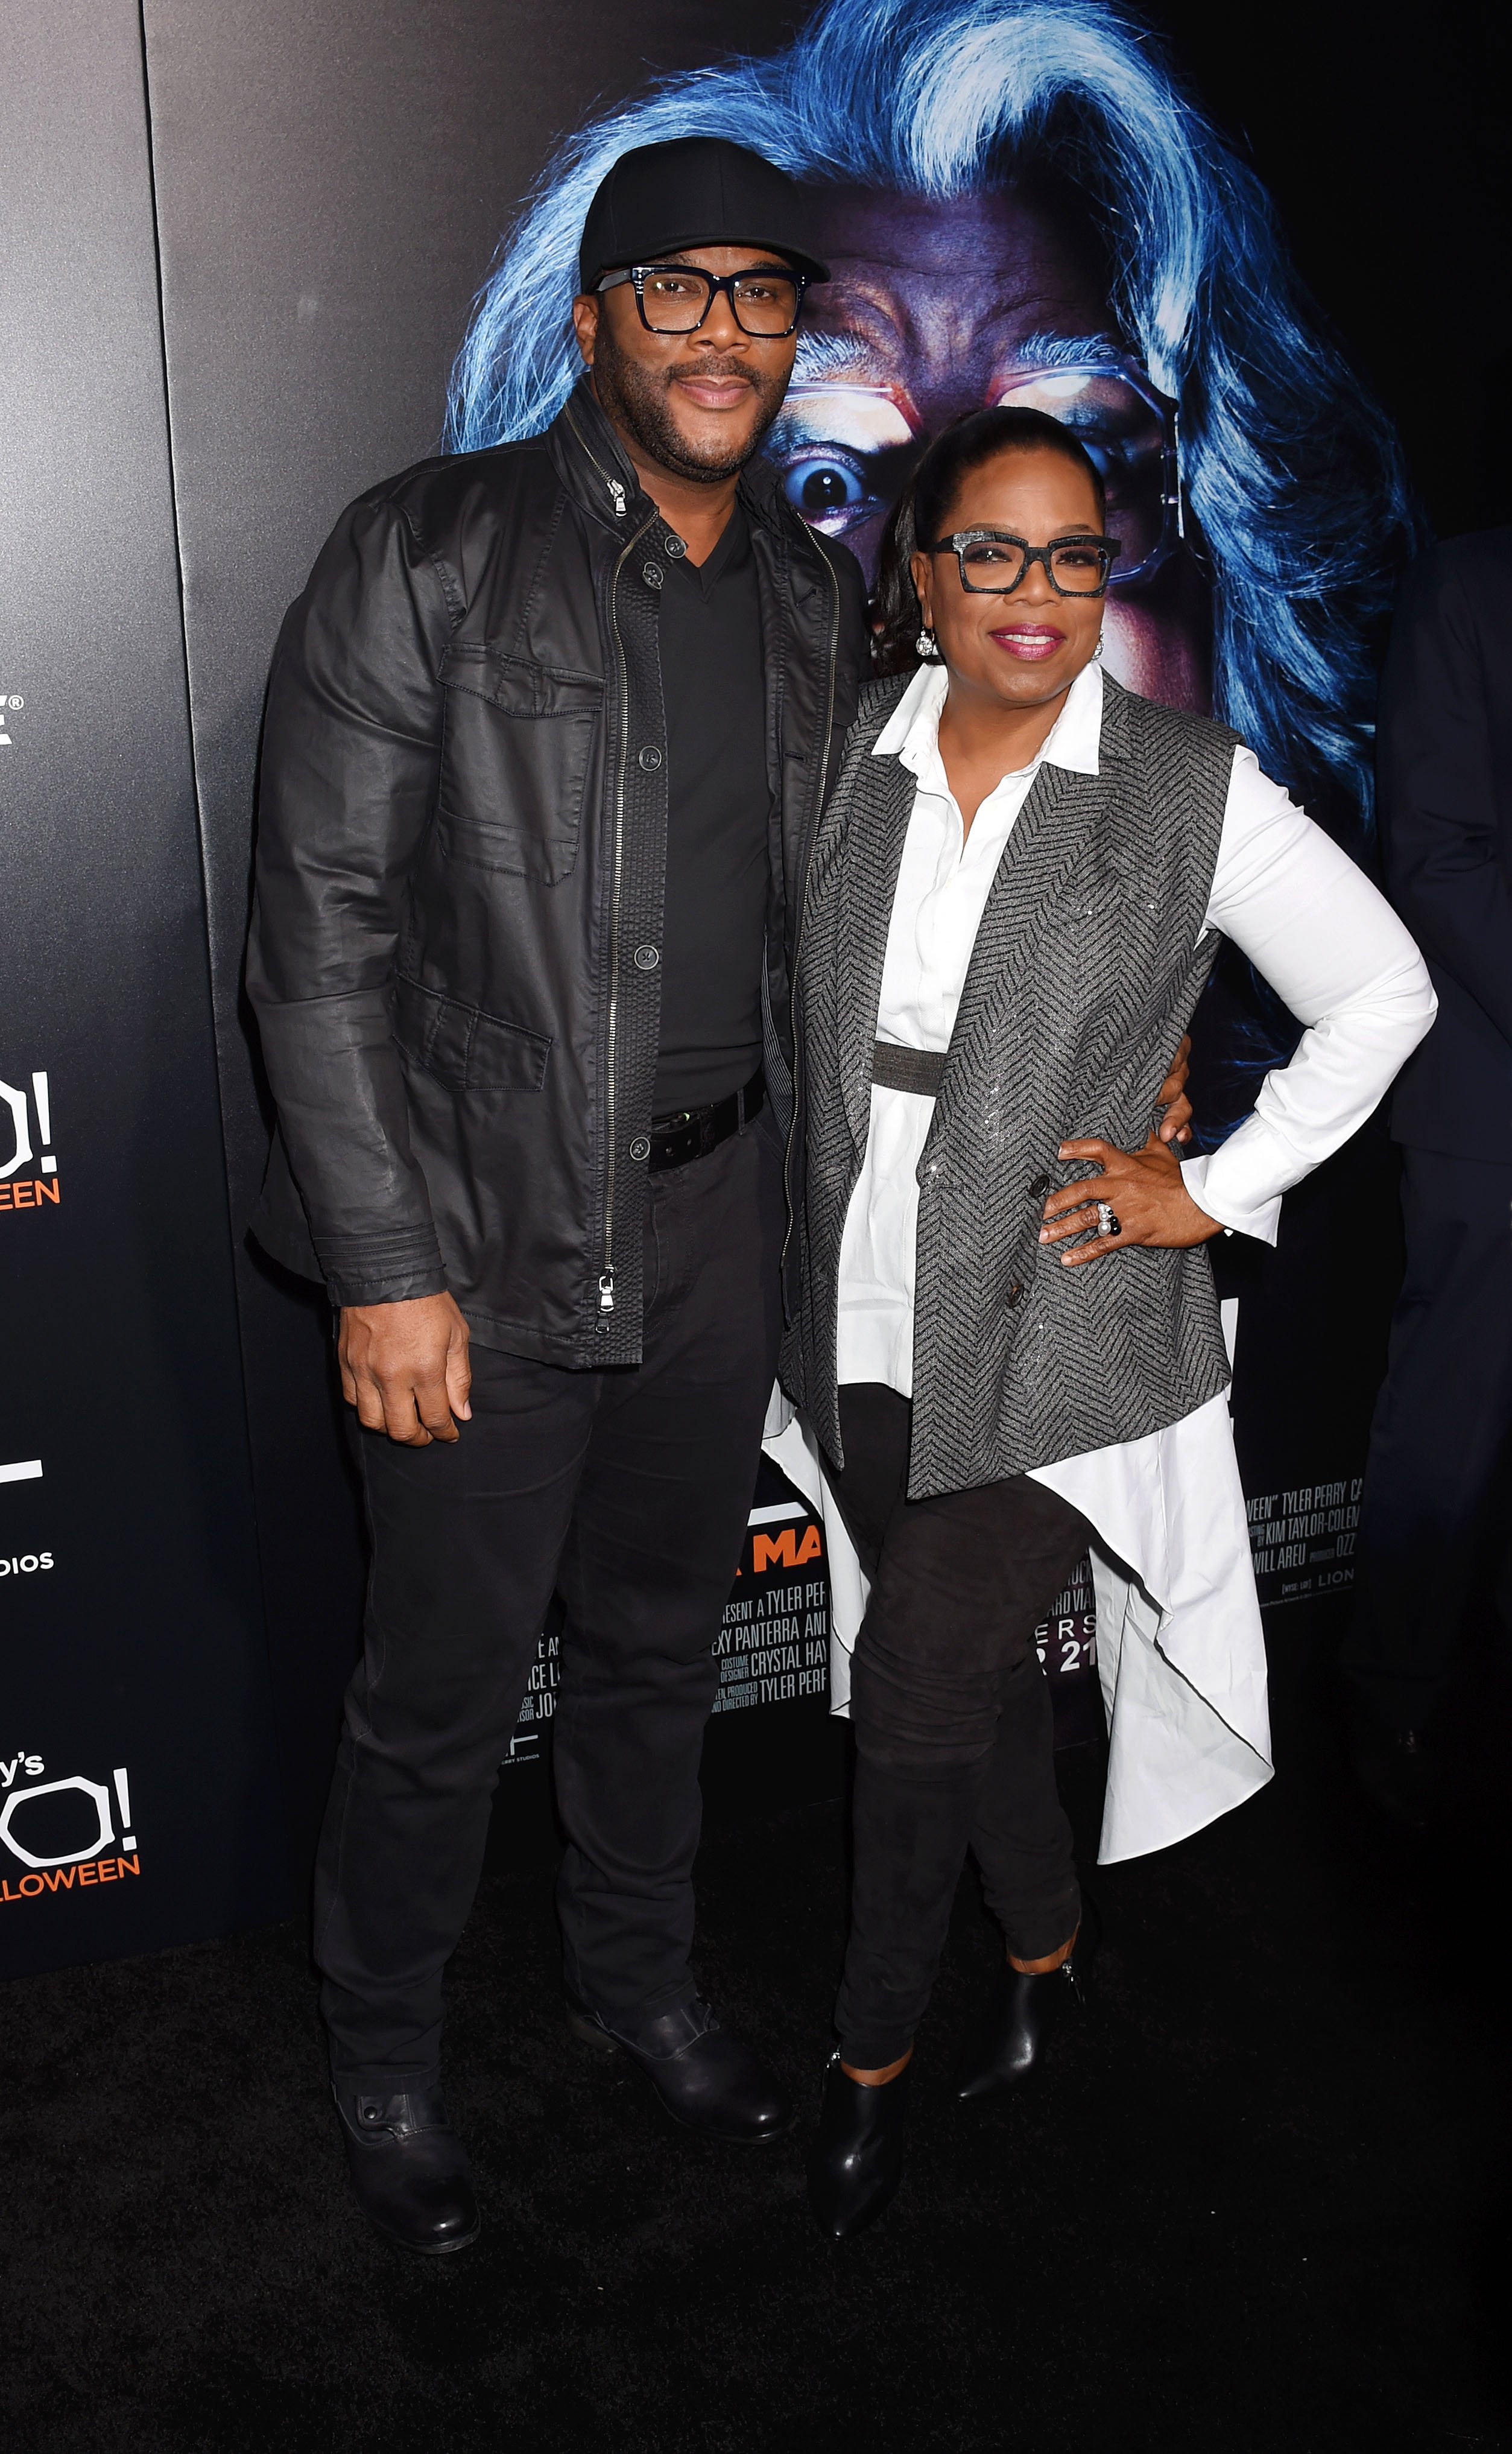 Tyler Perry and Oprah Winfrey at the premiere of 'Boo! A Madea Halloween' on Oct. 17, 2016 in California | Photo: Getty Images